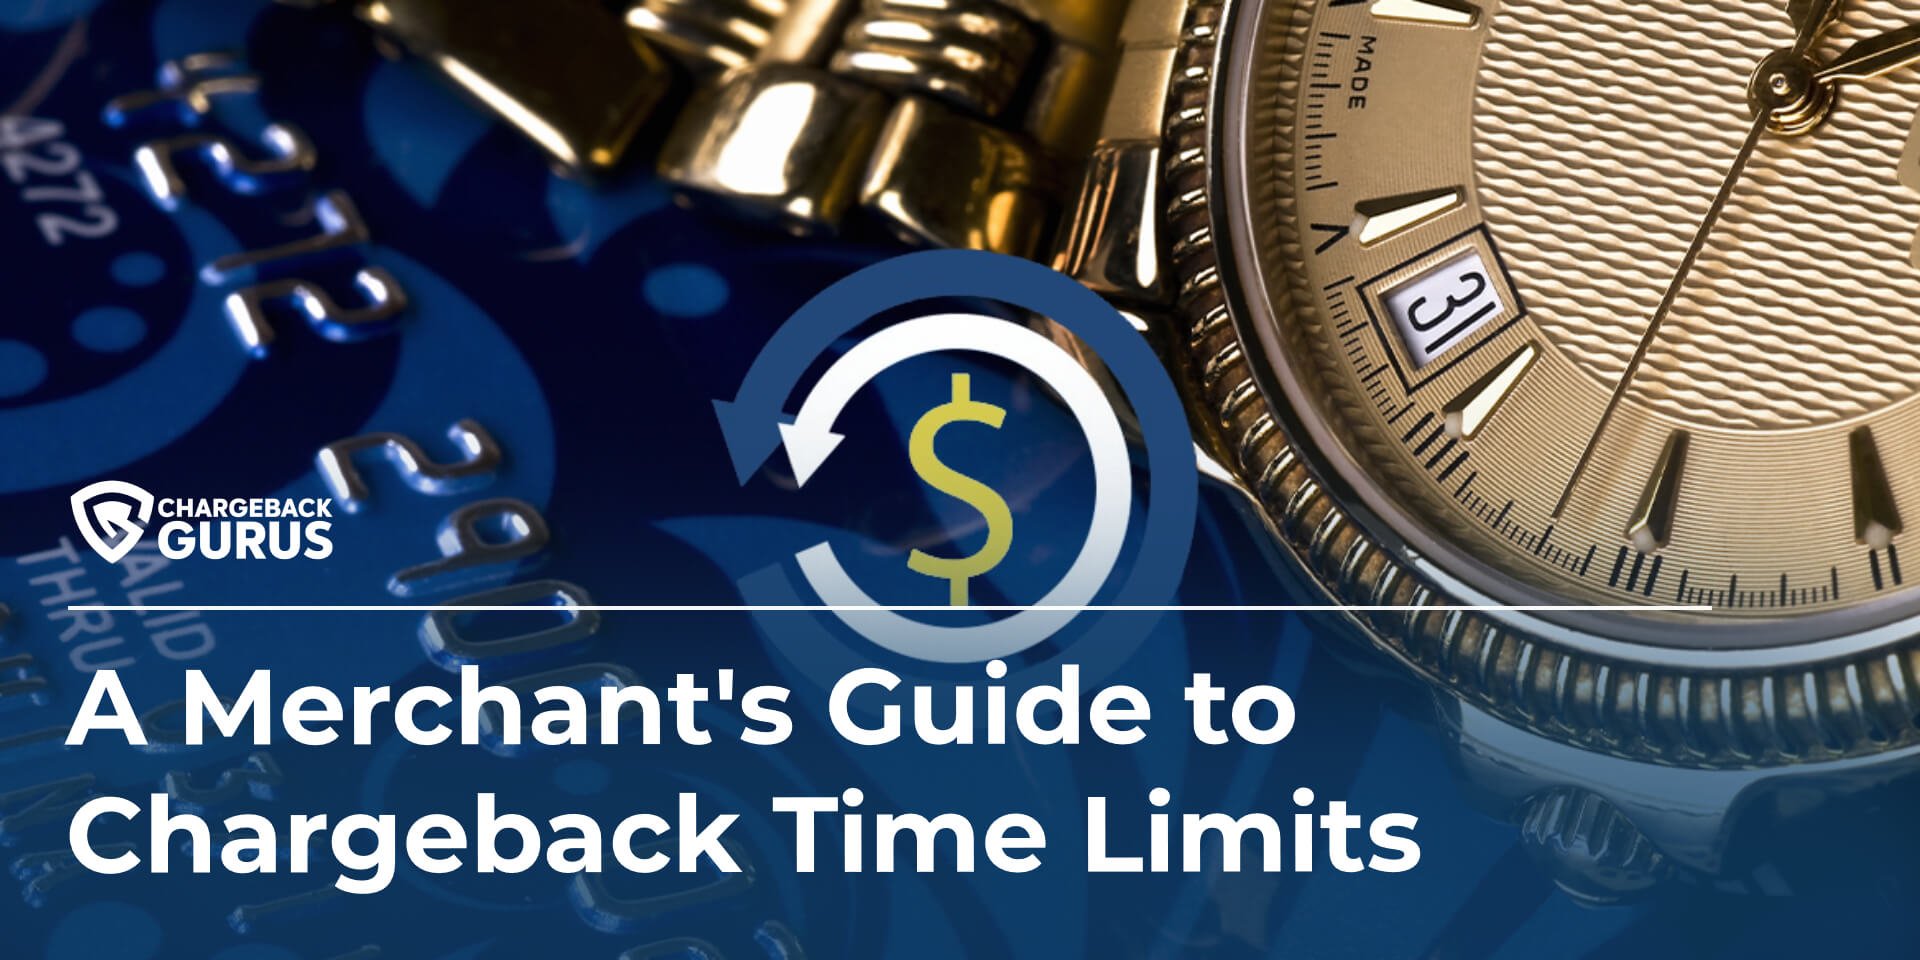 Chargeback time limits